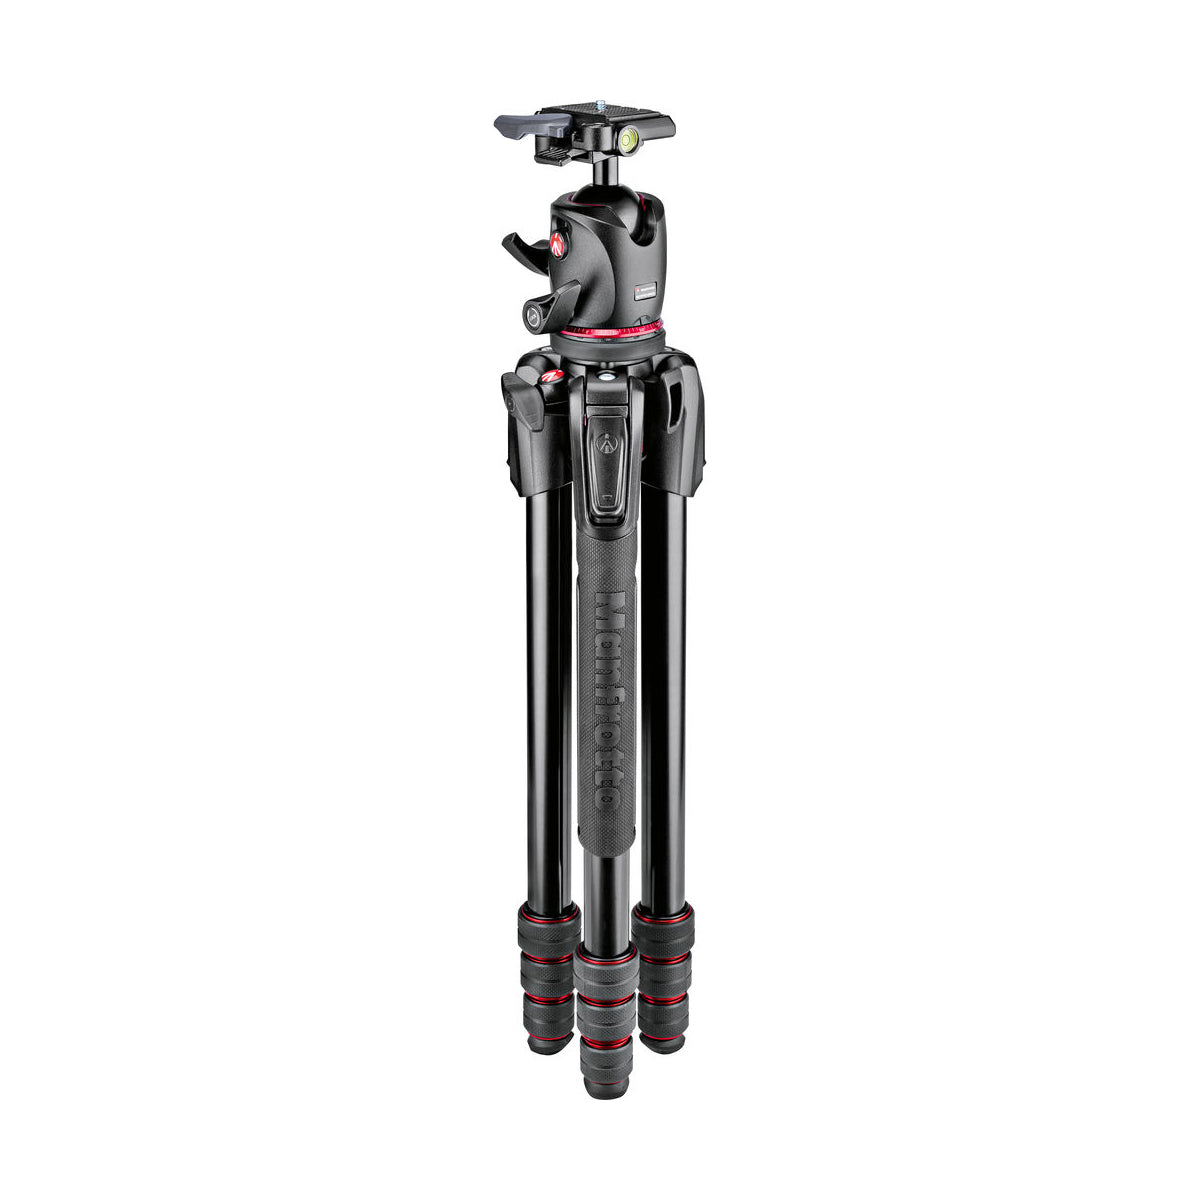 Manfrotto 190go! Aluminum 4 Section Tripod with Ball Head